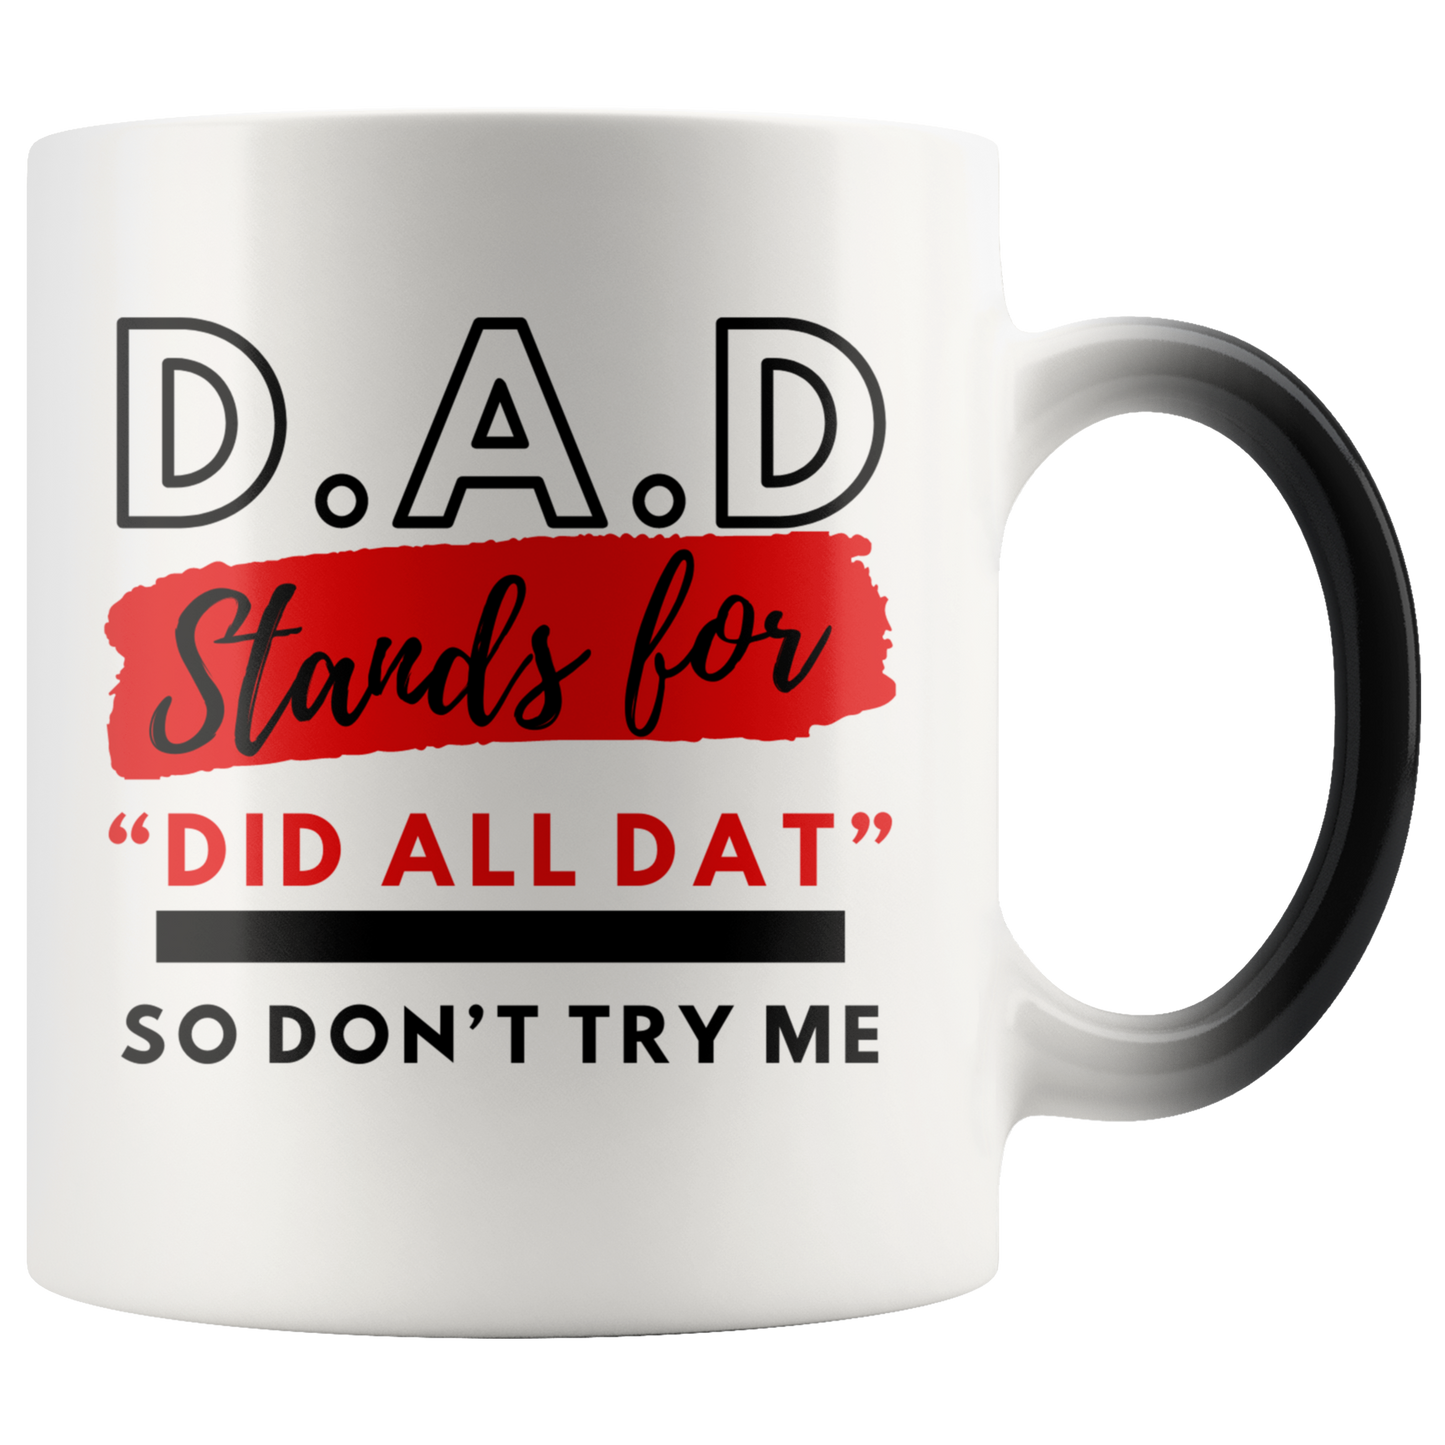 Dad Stands For Did All Dat So Don't Try Me Magic Mug